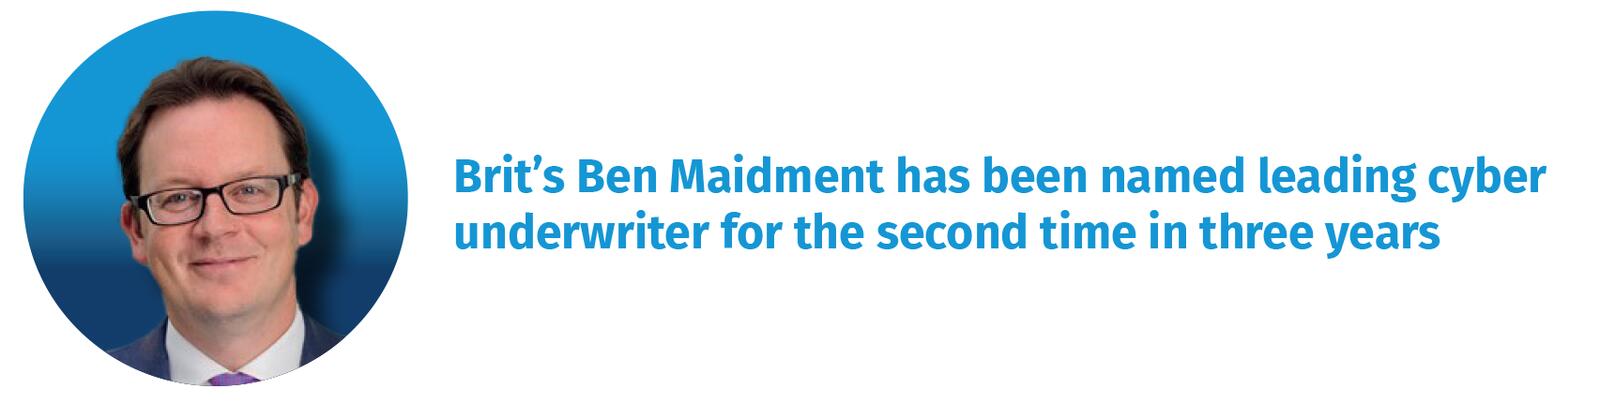 Brit’s Ben Maidment has been named leading cyber underwriter for the second time in three years